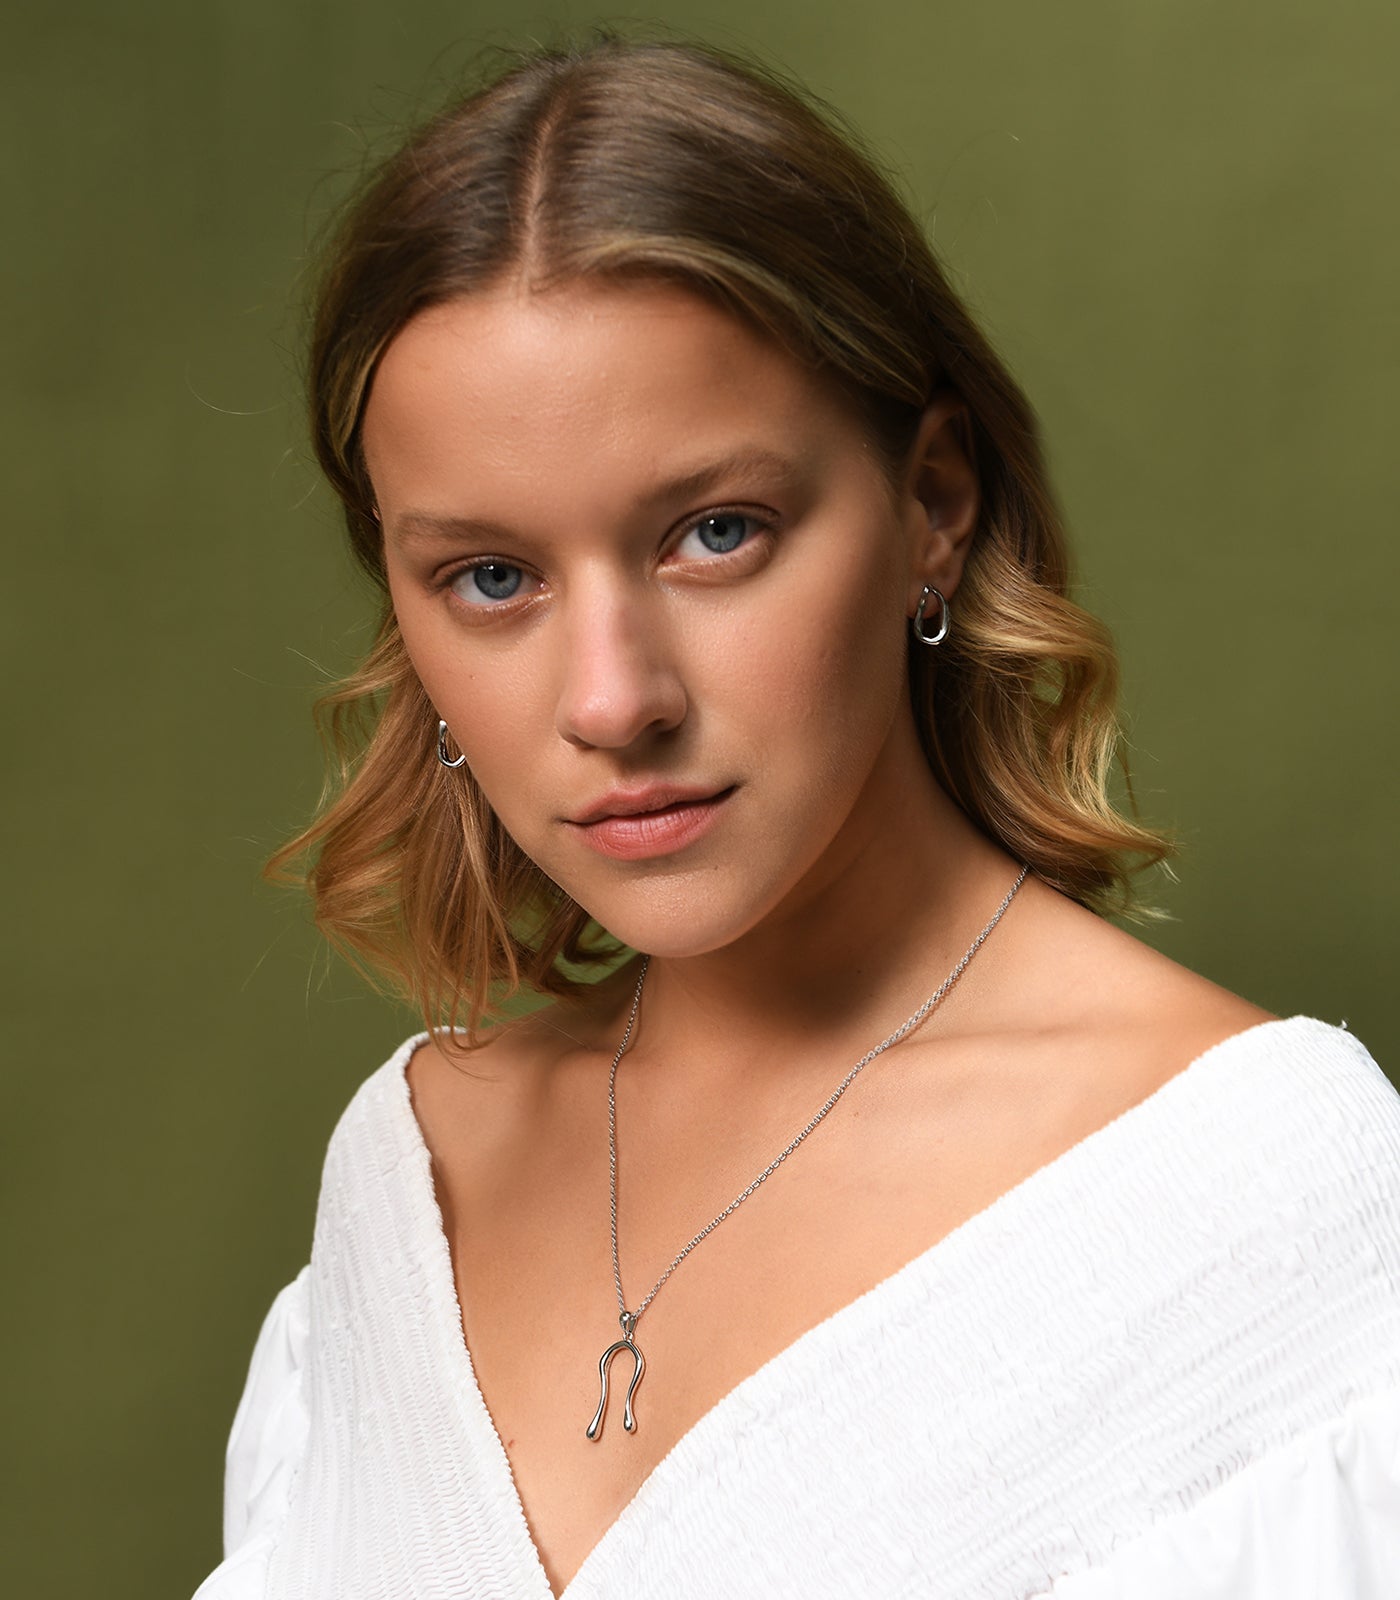 A model wears a sterling silver necklace with a liquid curve pendant resembling water droplets.